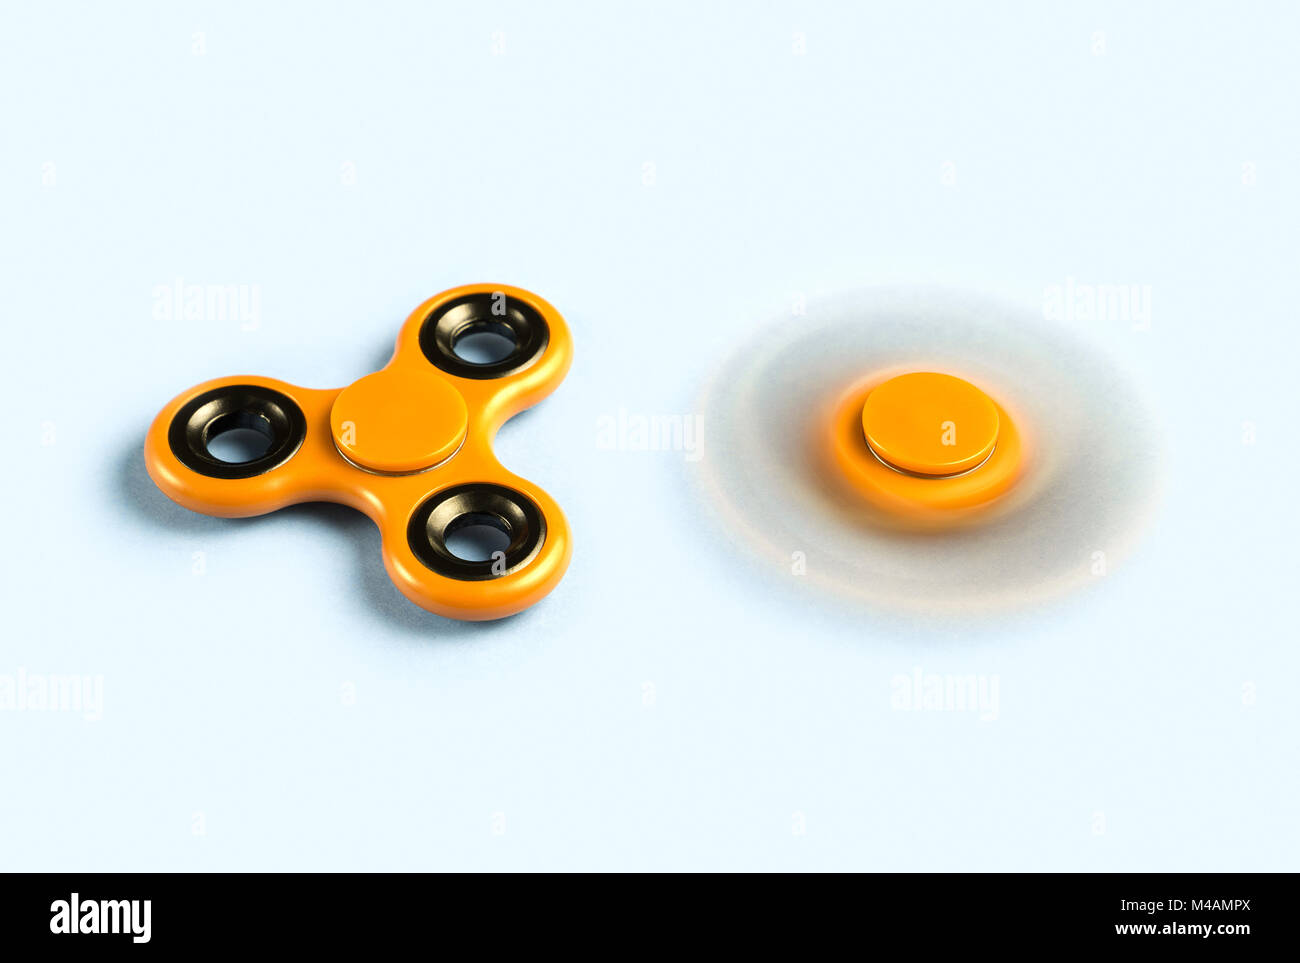 Two fidget spinners on light background, table and platform. One standing still and stopped and the other spinning fast with motion blur. Stock Photo